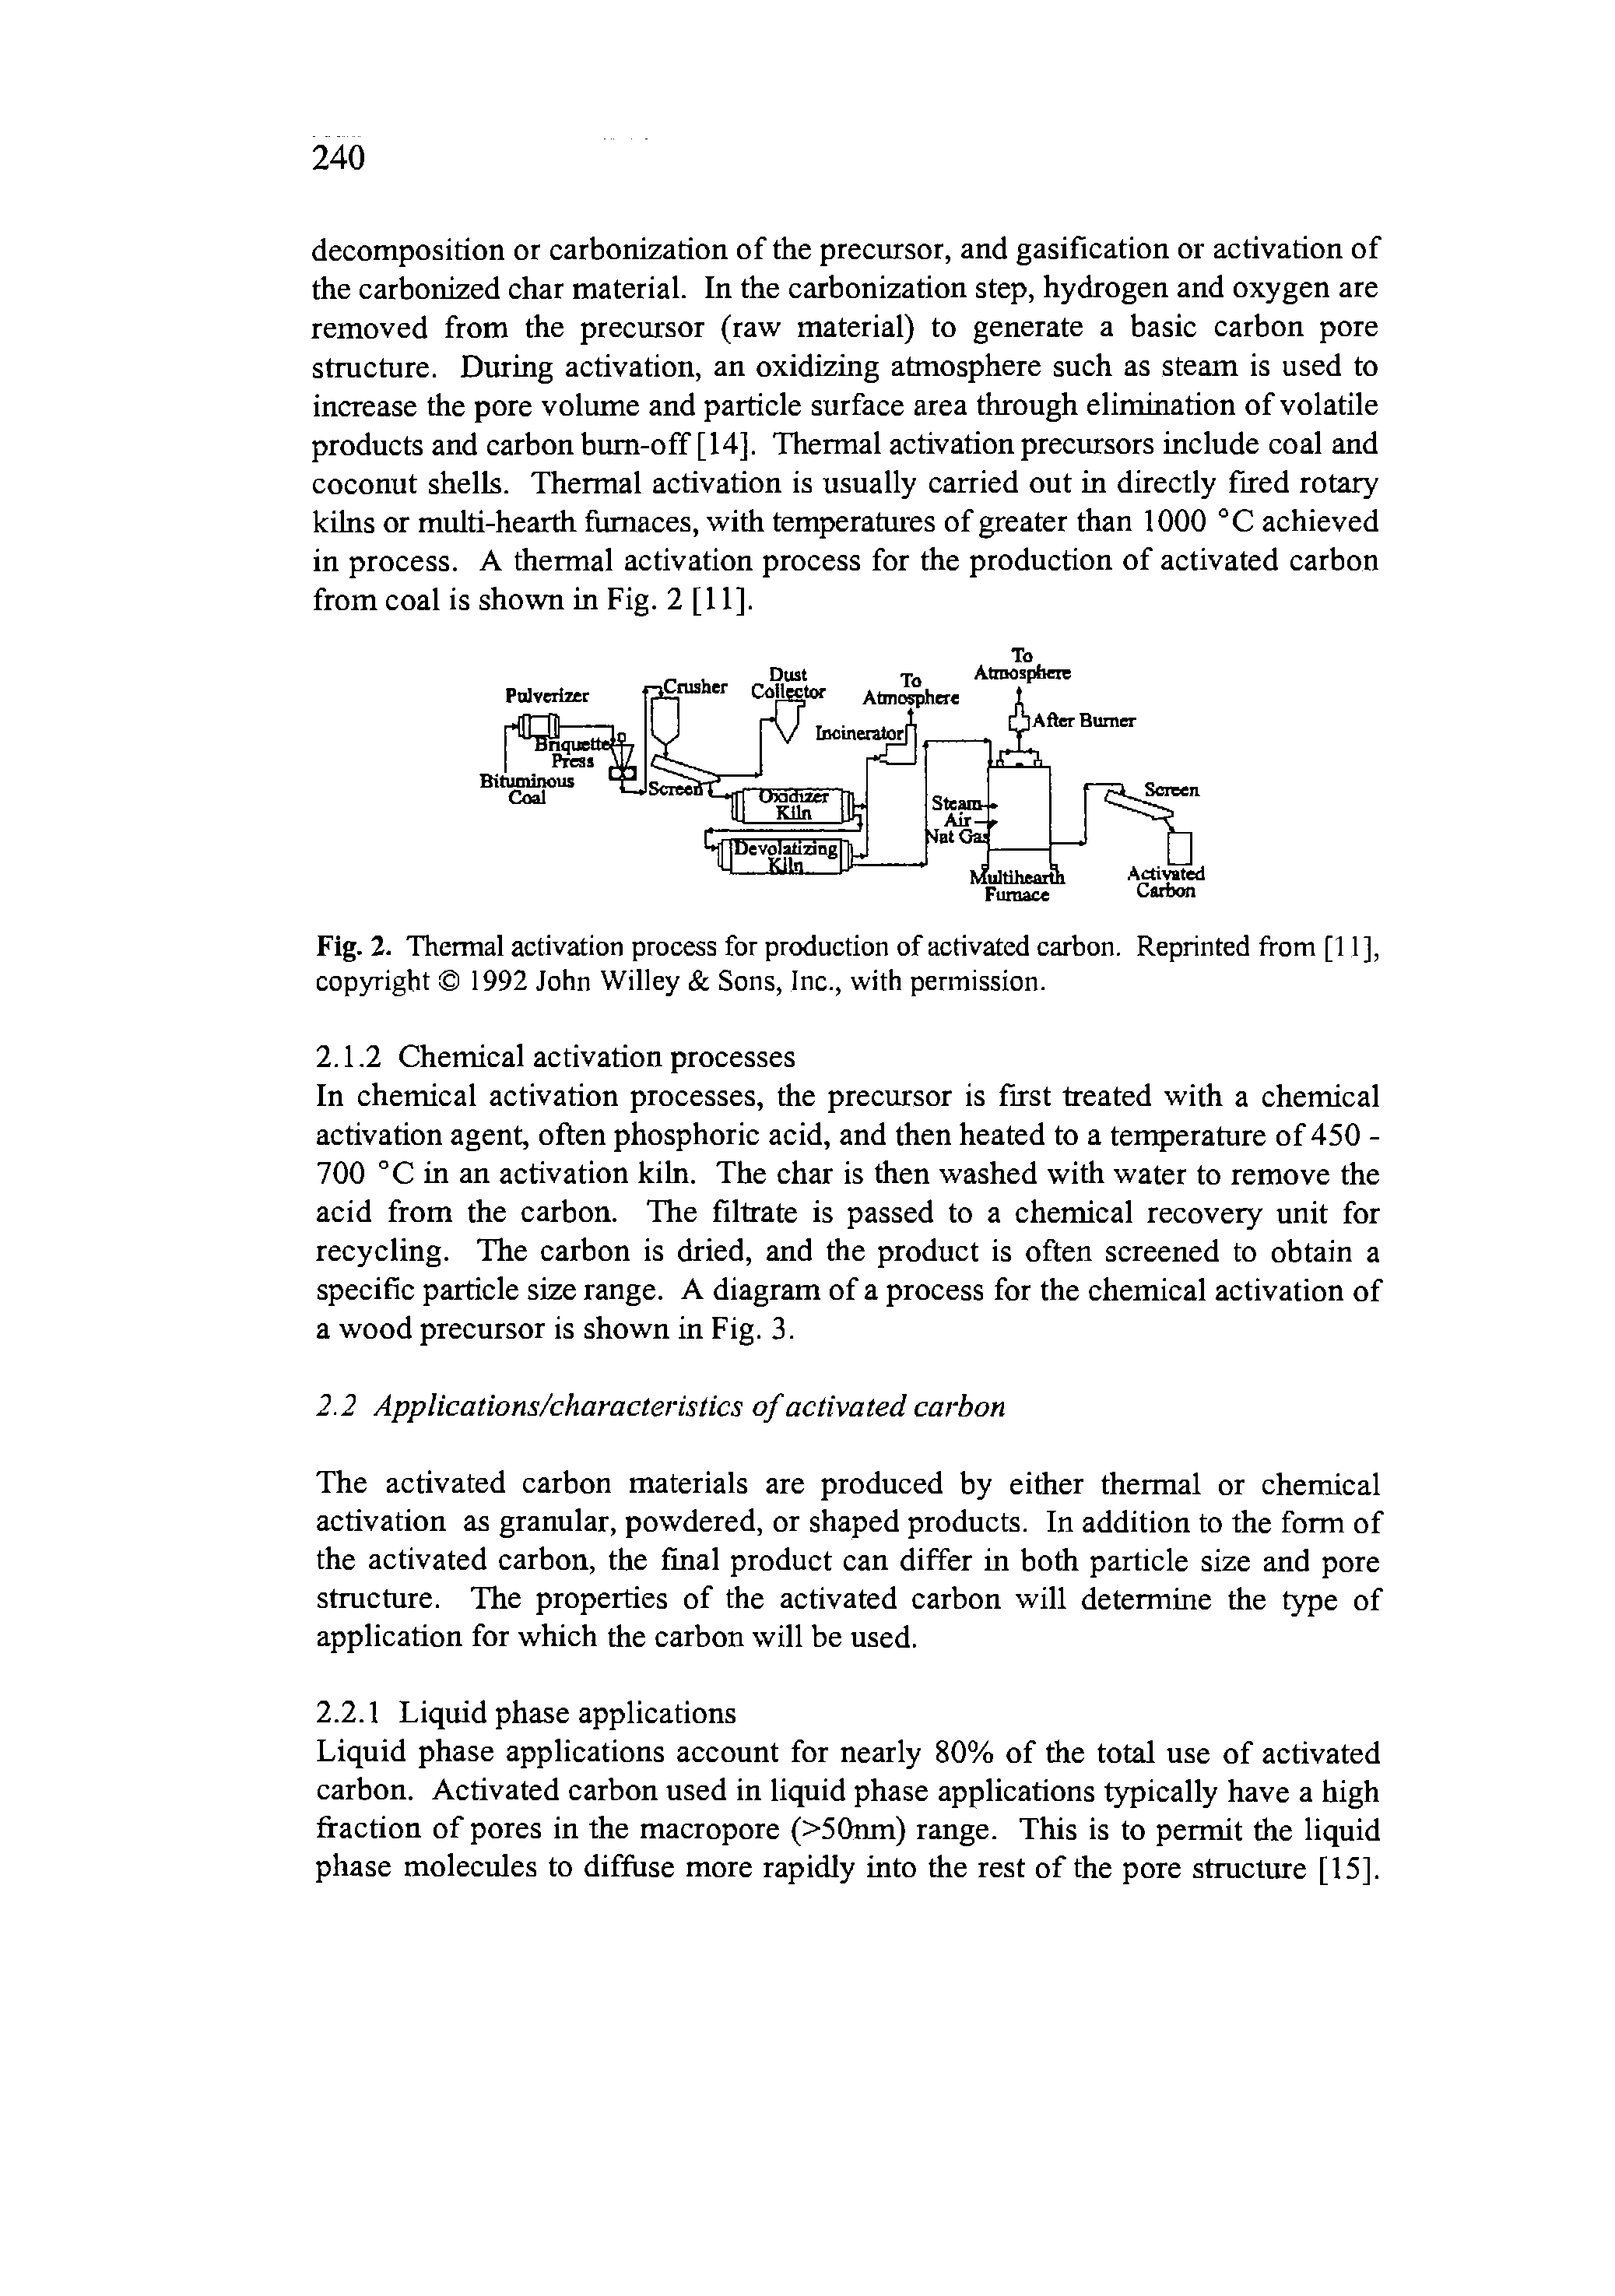 Fig. 2. Thermal activation process for production of activated carbon. Reprinted from [11], copyright 1992 John Willey Sons, Inc., with permission.